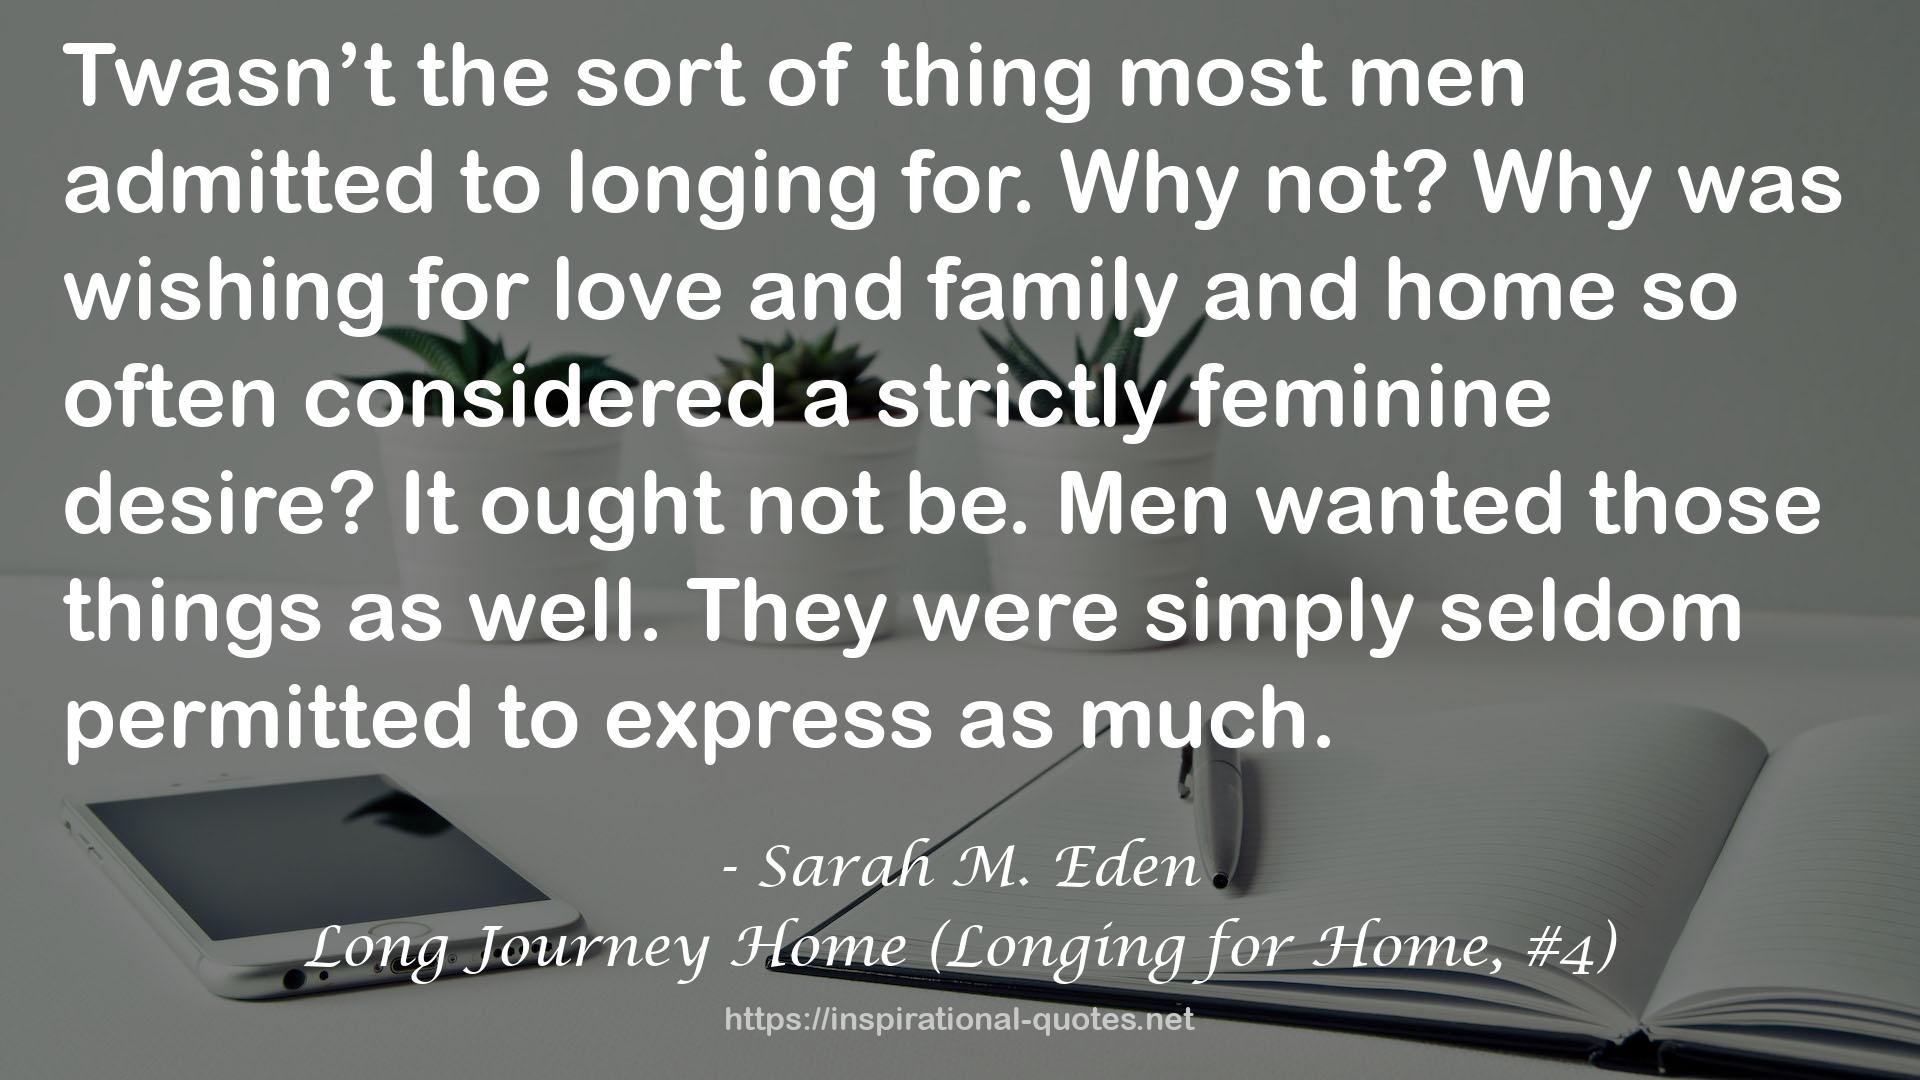 Long Journey Home (Longing for Home, #4) QUOTES